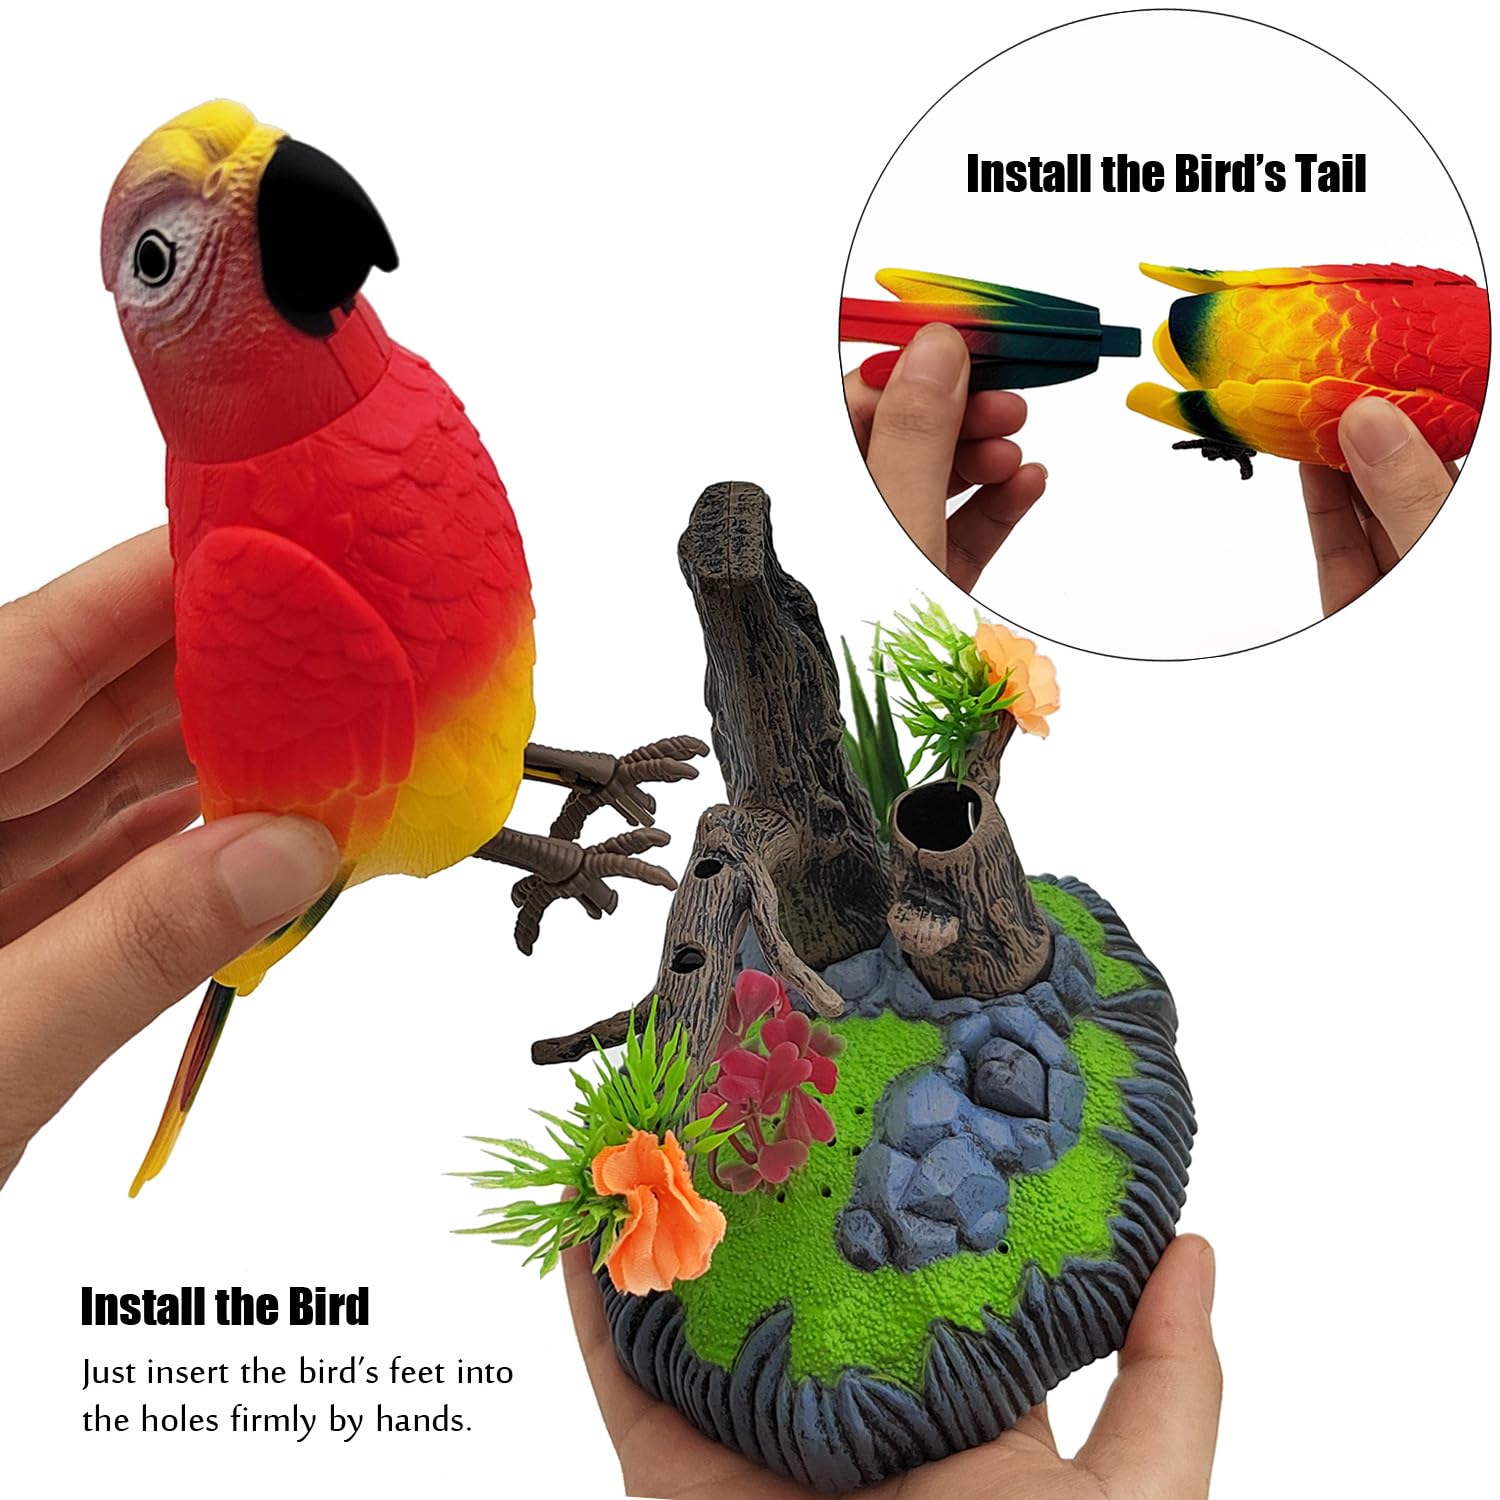 Tipmant Electronic Bird Toys Electric Parrots Animal Pets Move Chirp Realistic Home Office Room Decoration Kids Birthday Gifts (Red)